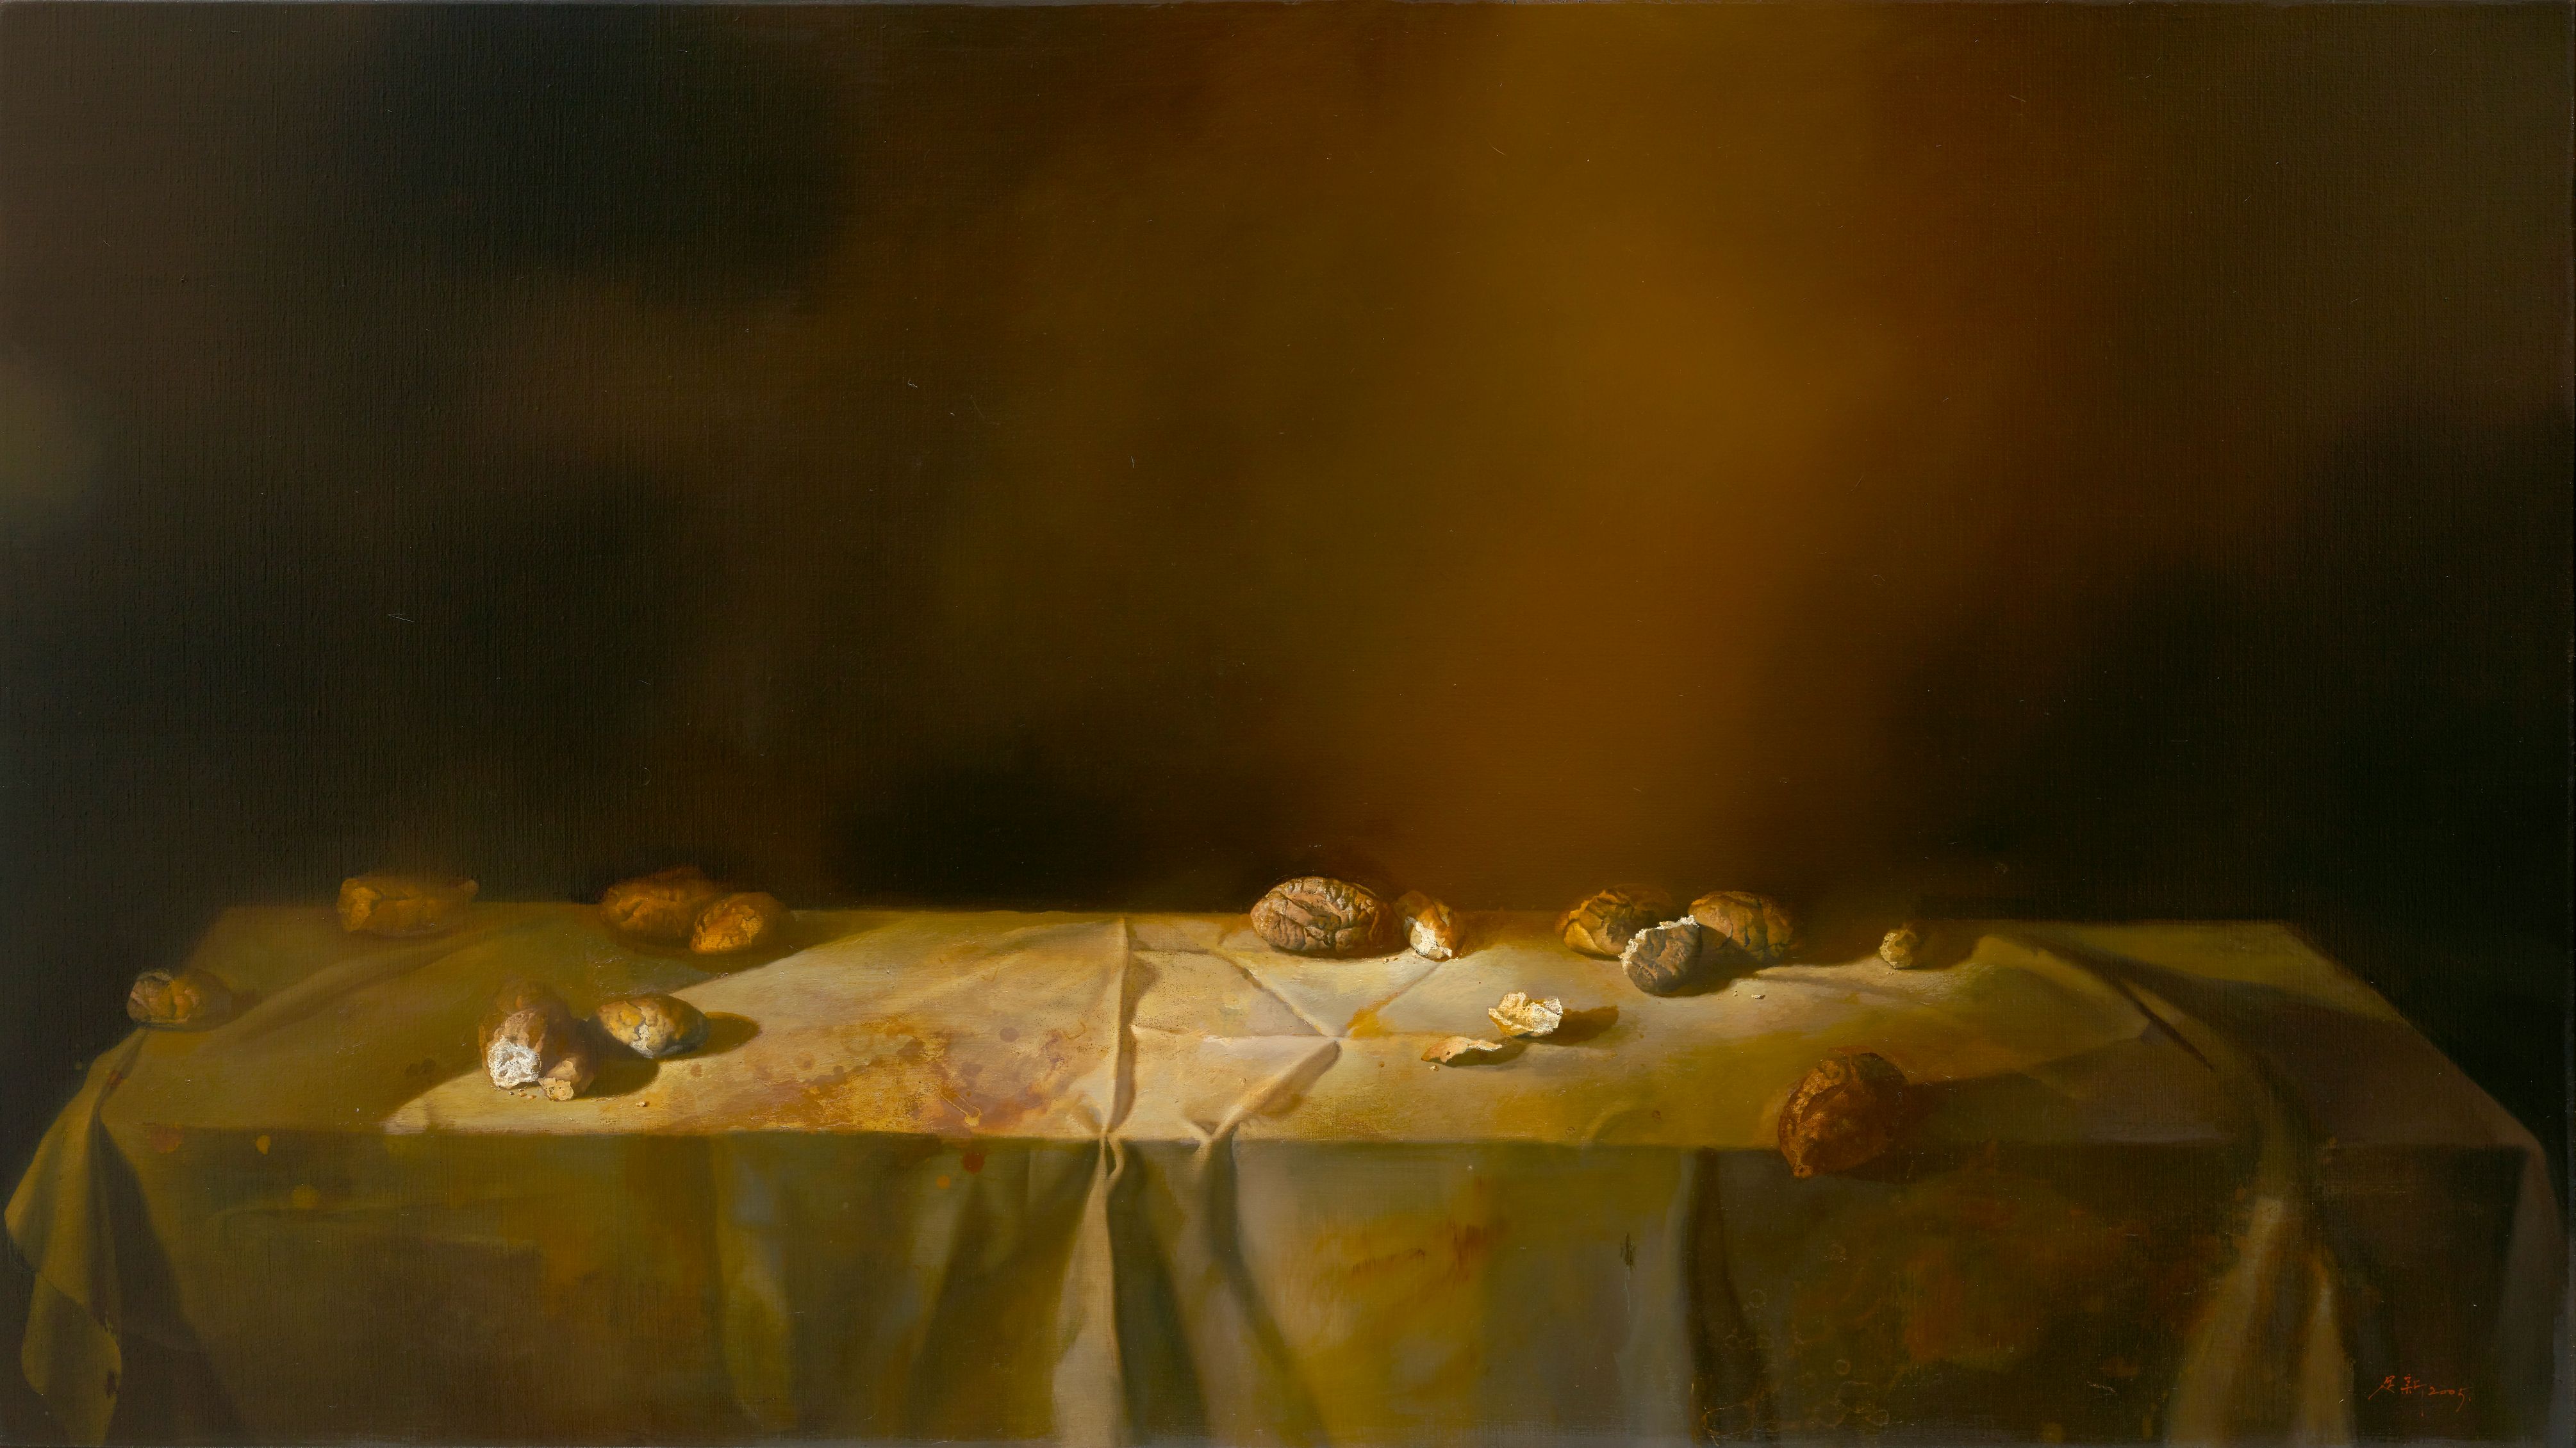 The Last Supper(I) | Oil on canvas | 163 x 93 cm | 2005 | Private Collection